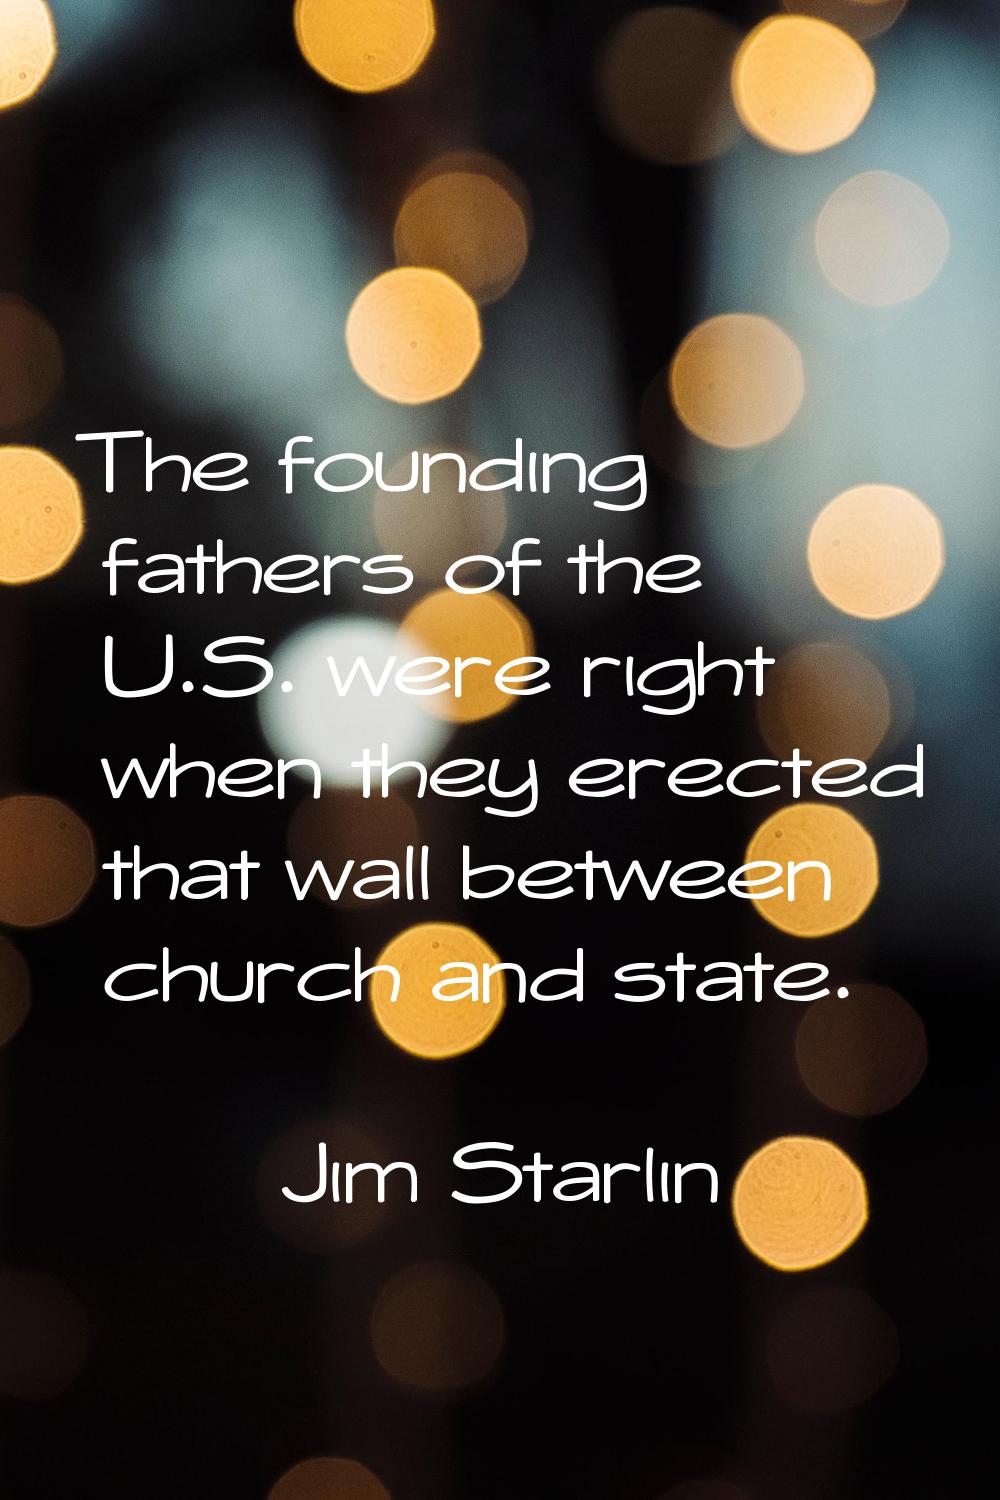 The founding fathers of the U.S. were right when they erected that wall between church and state.